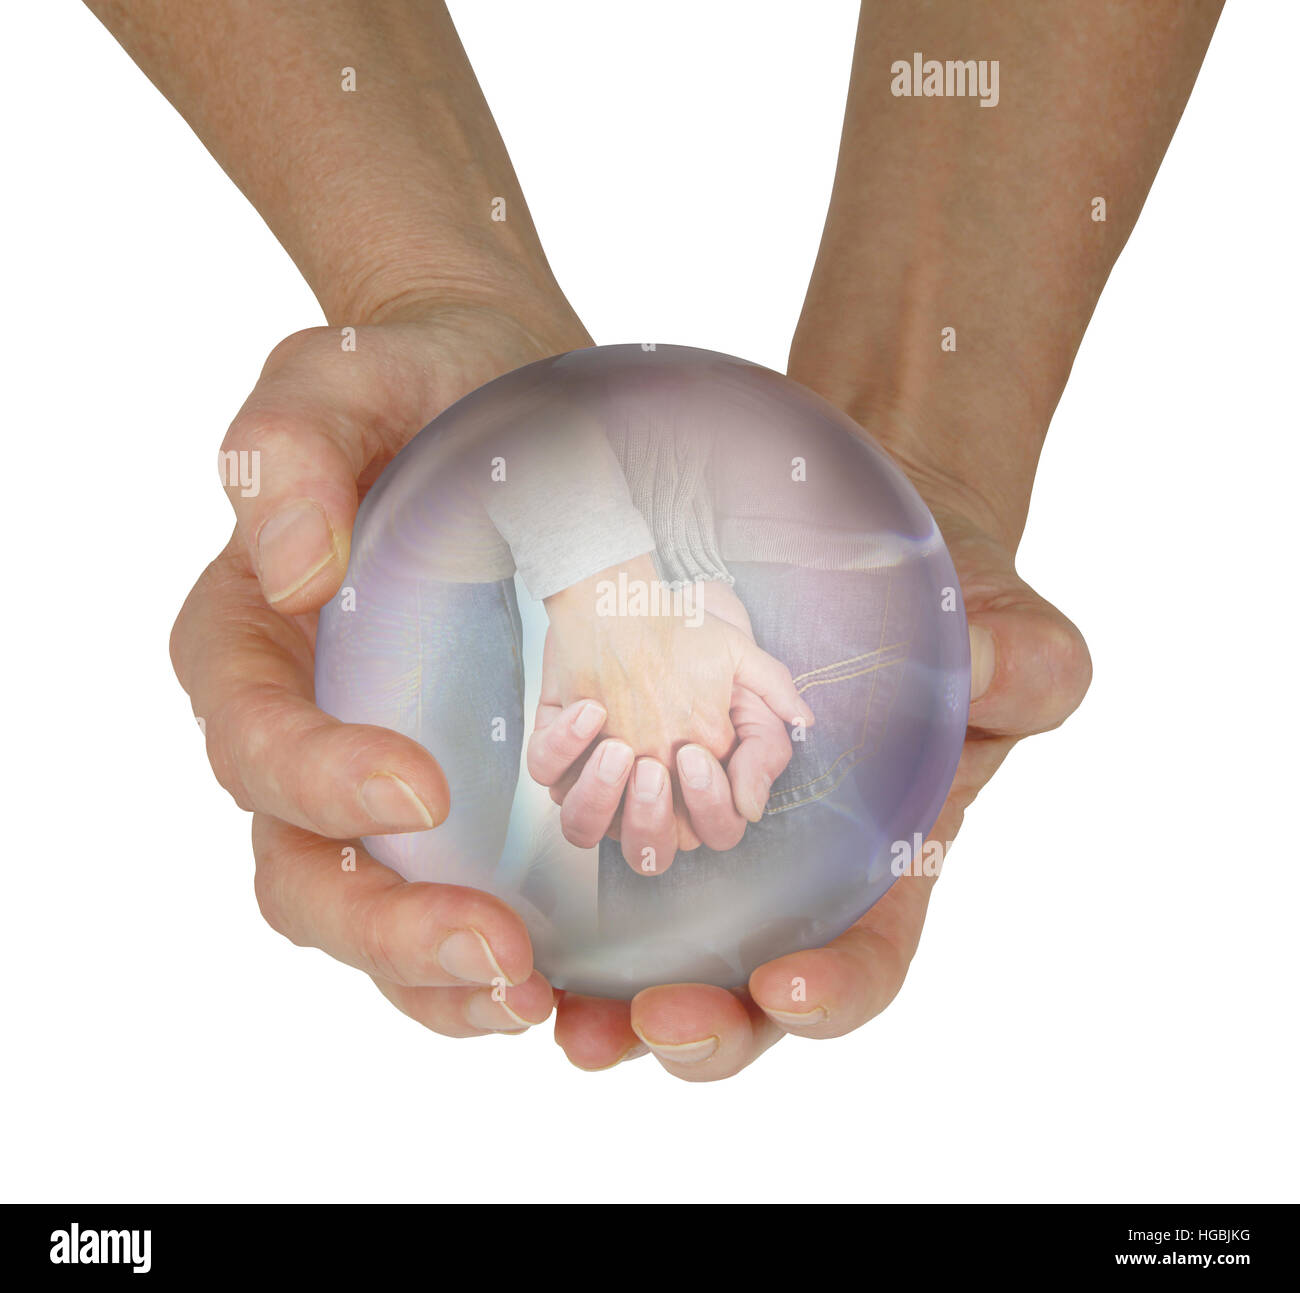 female fortune teller with large crystal ball held in cupped hands with a vision of a couple holding hands within, on white Stock Photo